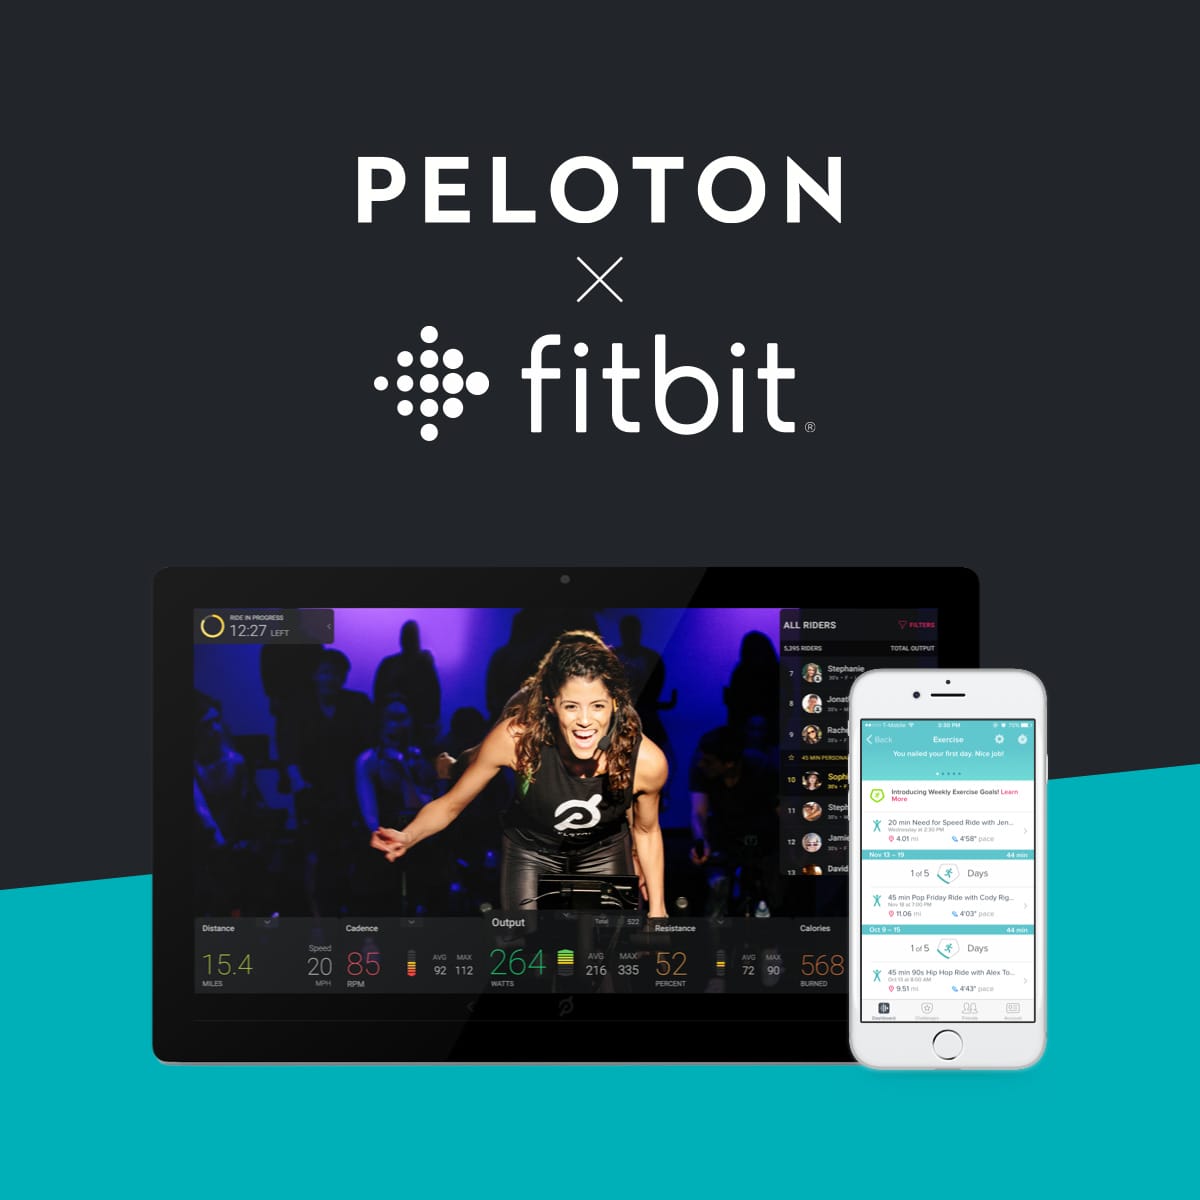 Does fitbit pair with peloton?